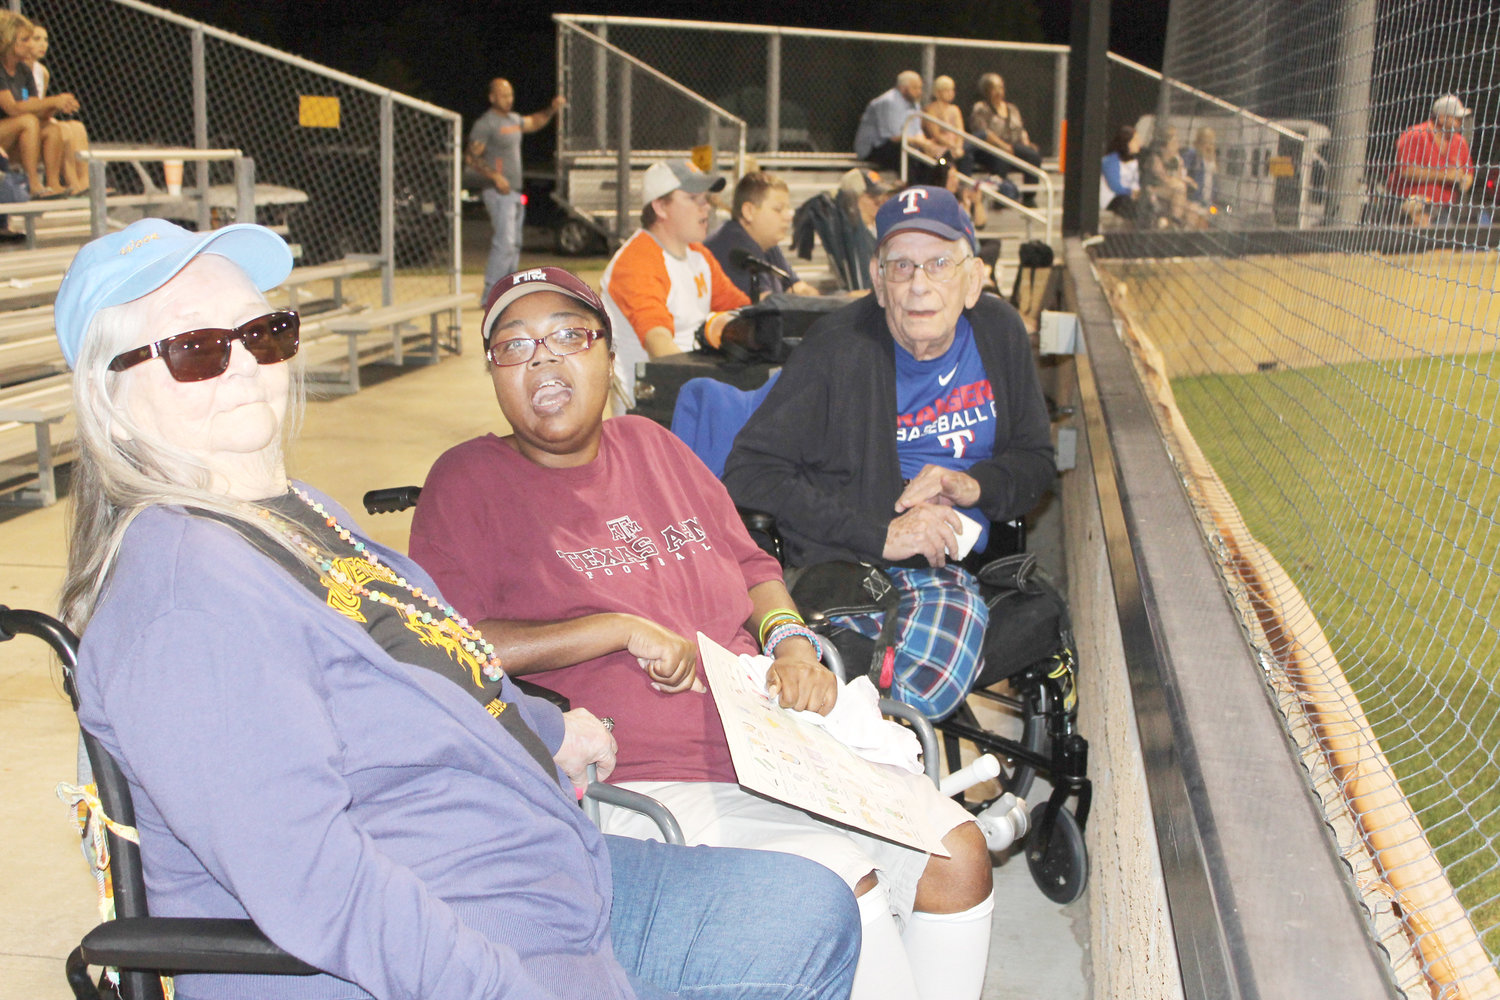 Seasoned baseball fans from Wood Memorial Nursing Home had a field trip to the Mineola versus Quitman baseball game in Mineola last Tuesday. Shown are, from left, Mary Winnett, Sharon Lewis and Doug Myers. They were taken to the game by Activity Director Mary Hall and Staffing Coordinator Amanda Walters. Hall said when she arrived at the home first thing that morning the fans were already ready to go to the game. (Monitor photo by Doris Newman)